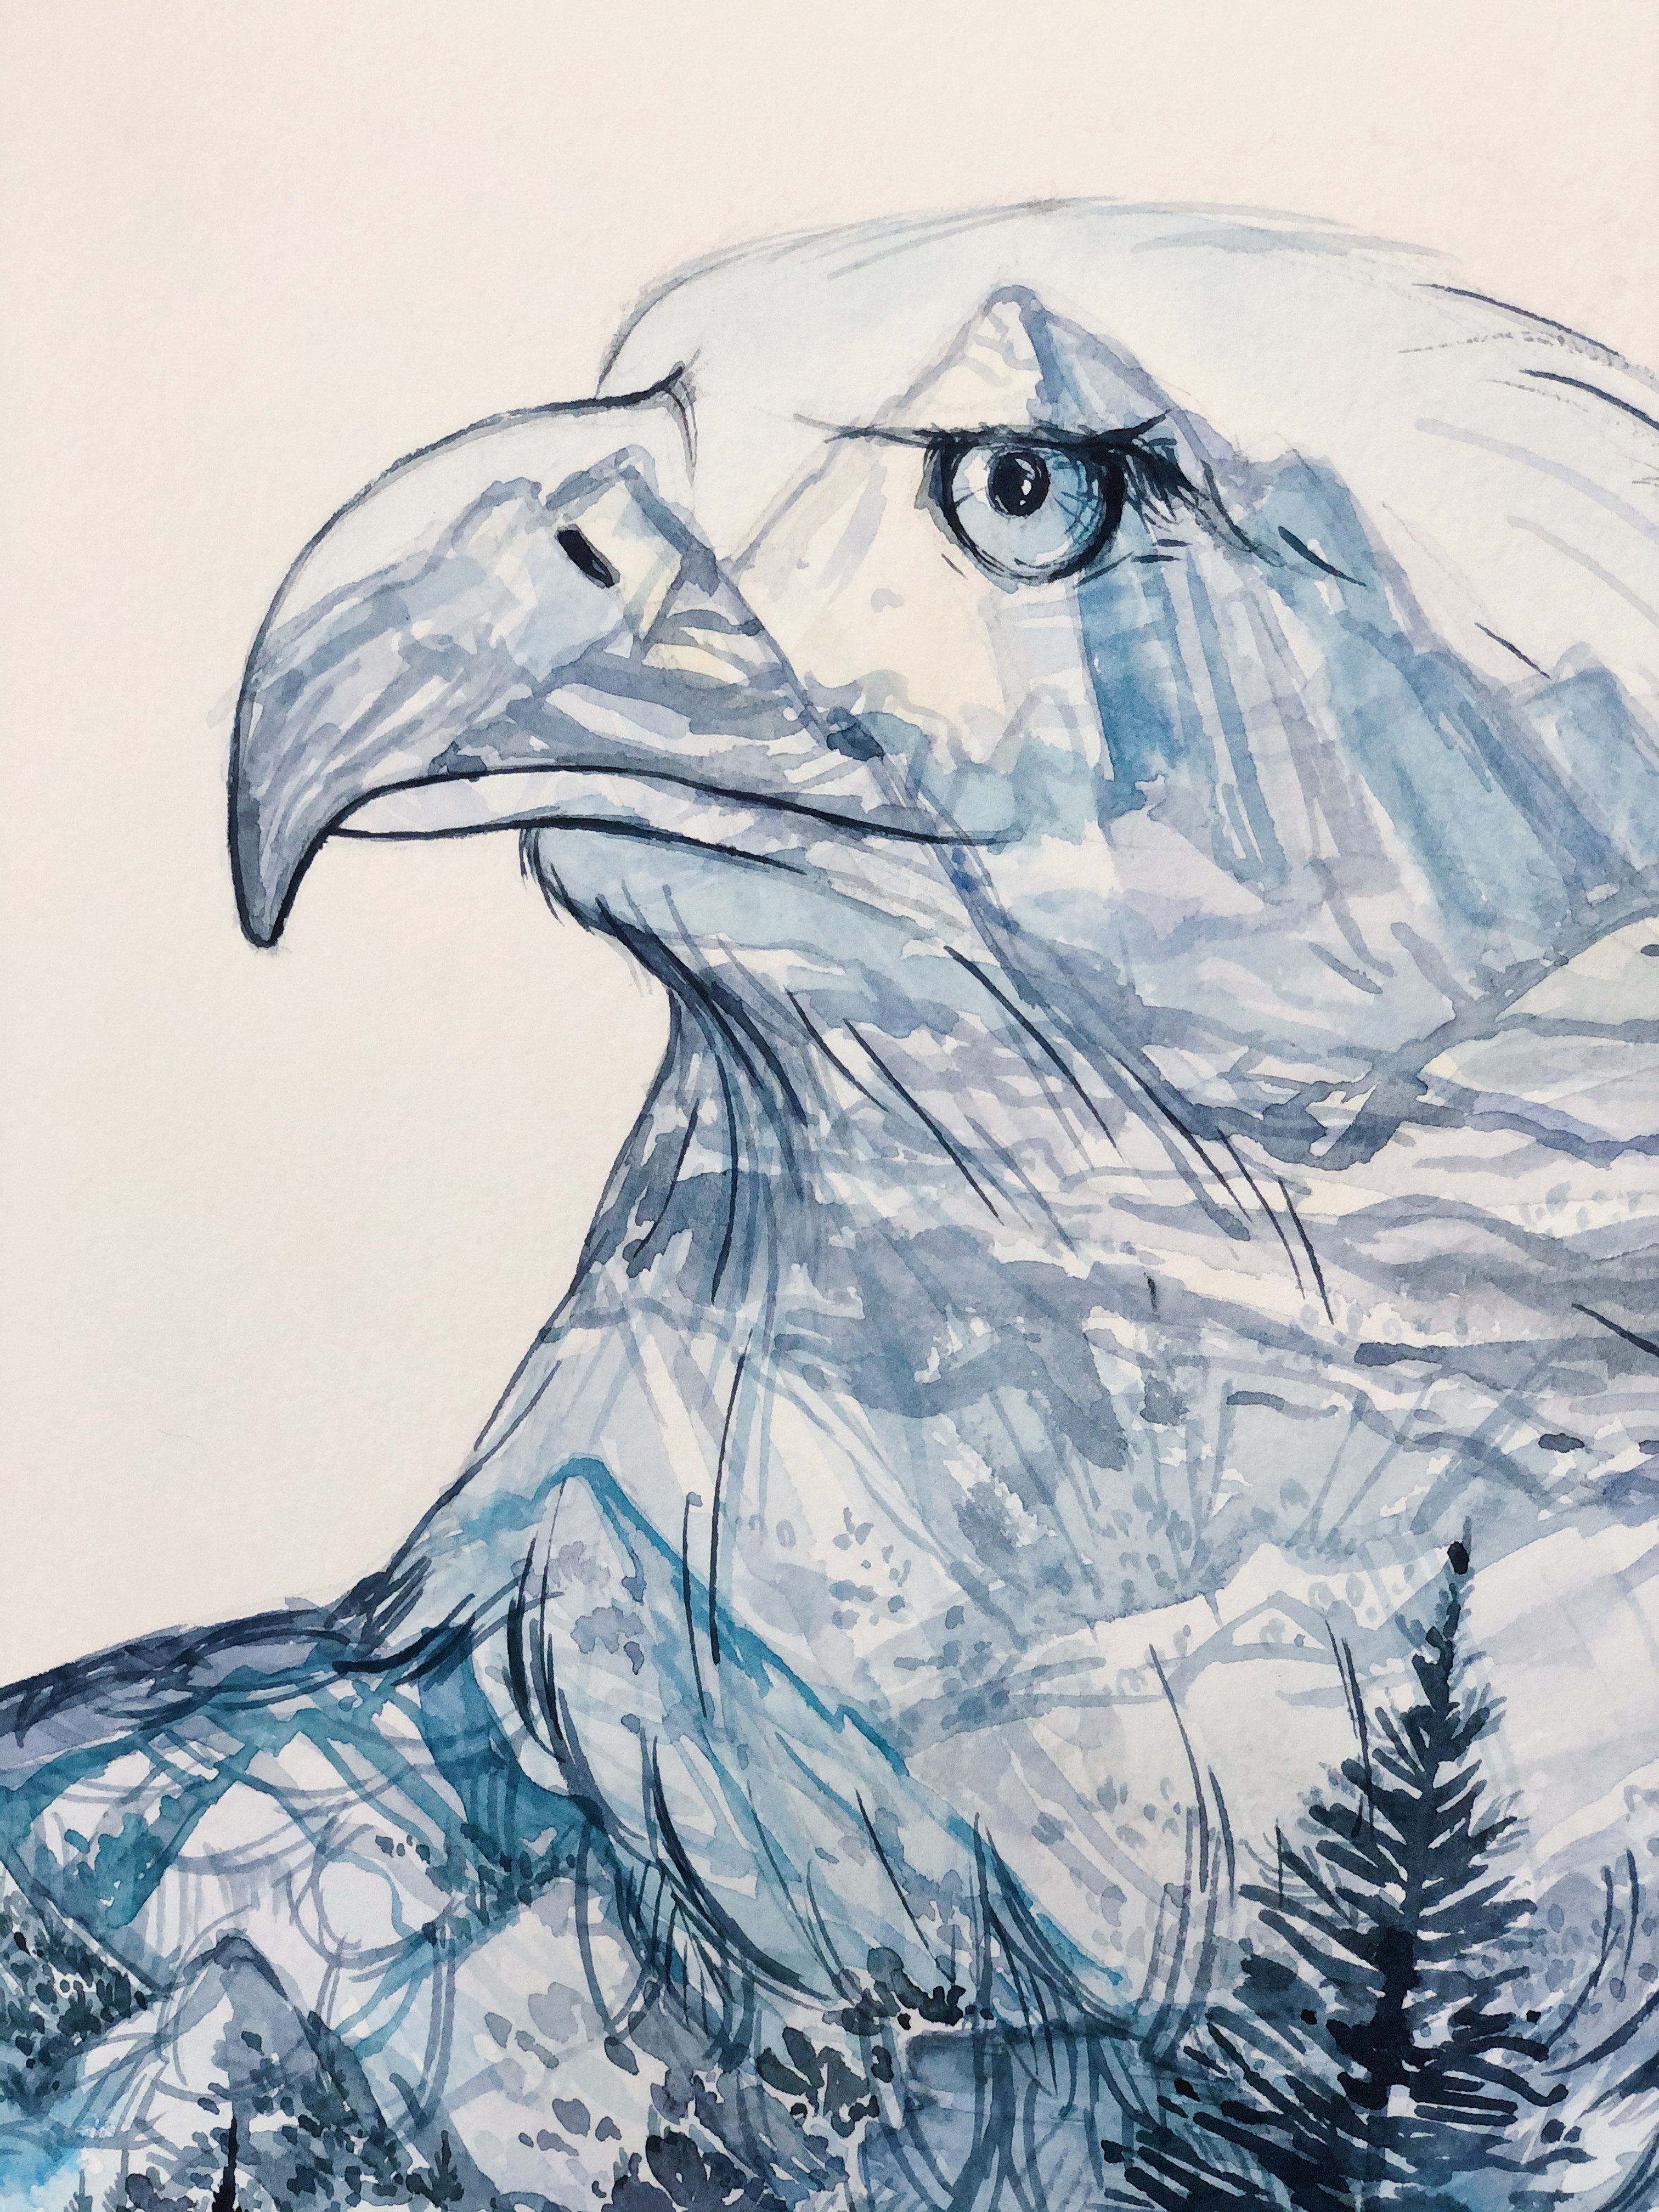 "Mountain Eagle" Double exposure Lake and Forest Original Watercolour Painting 11x14